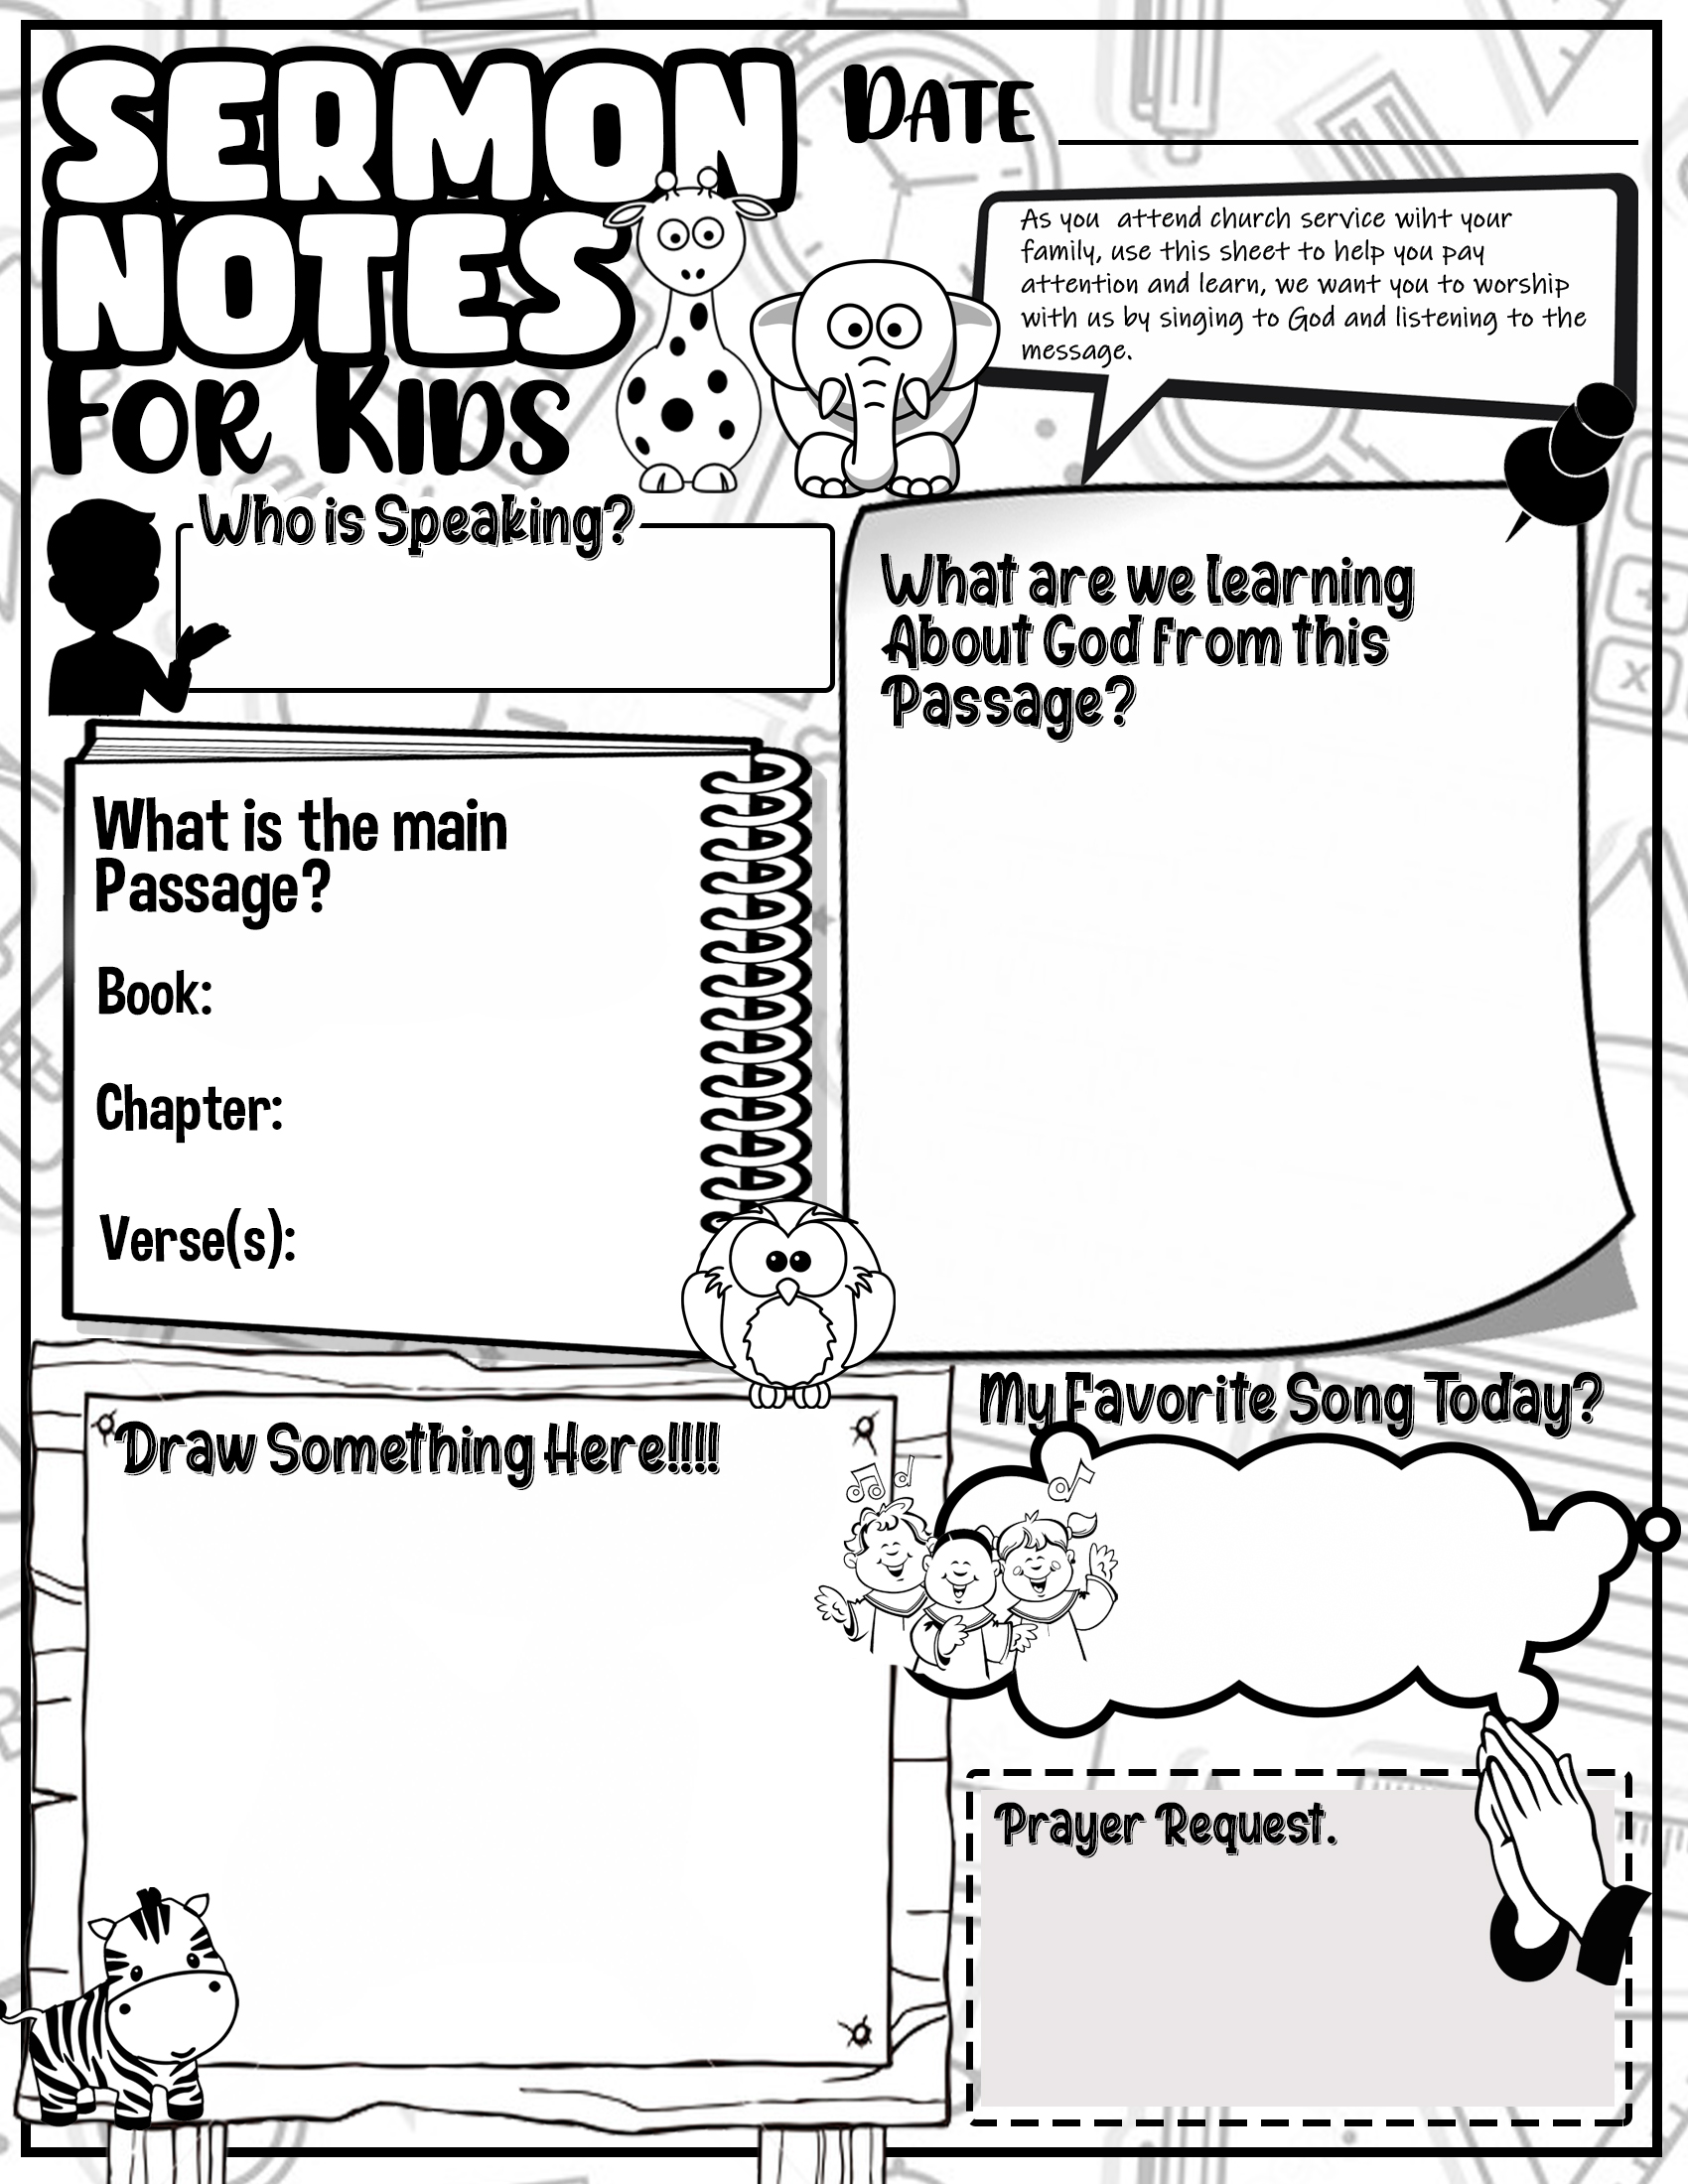 sermon-note-sheets-for-kids-free